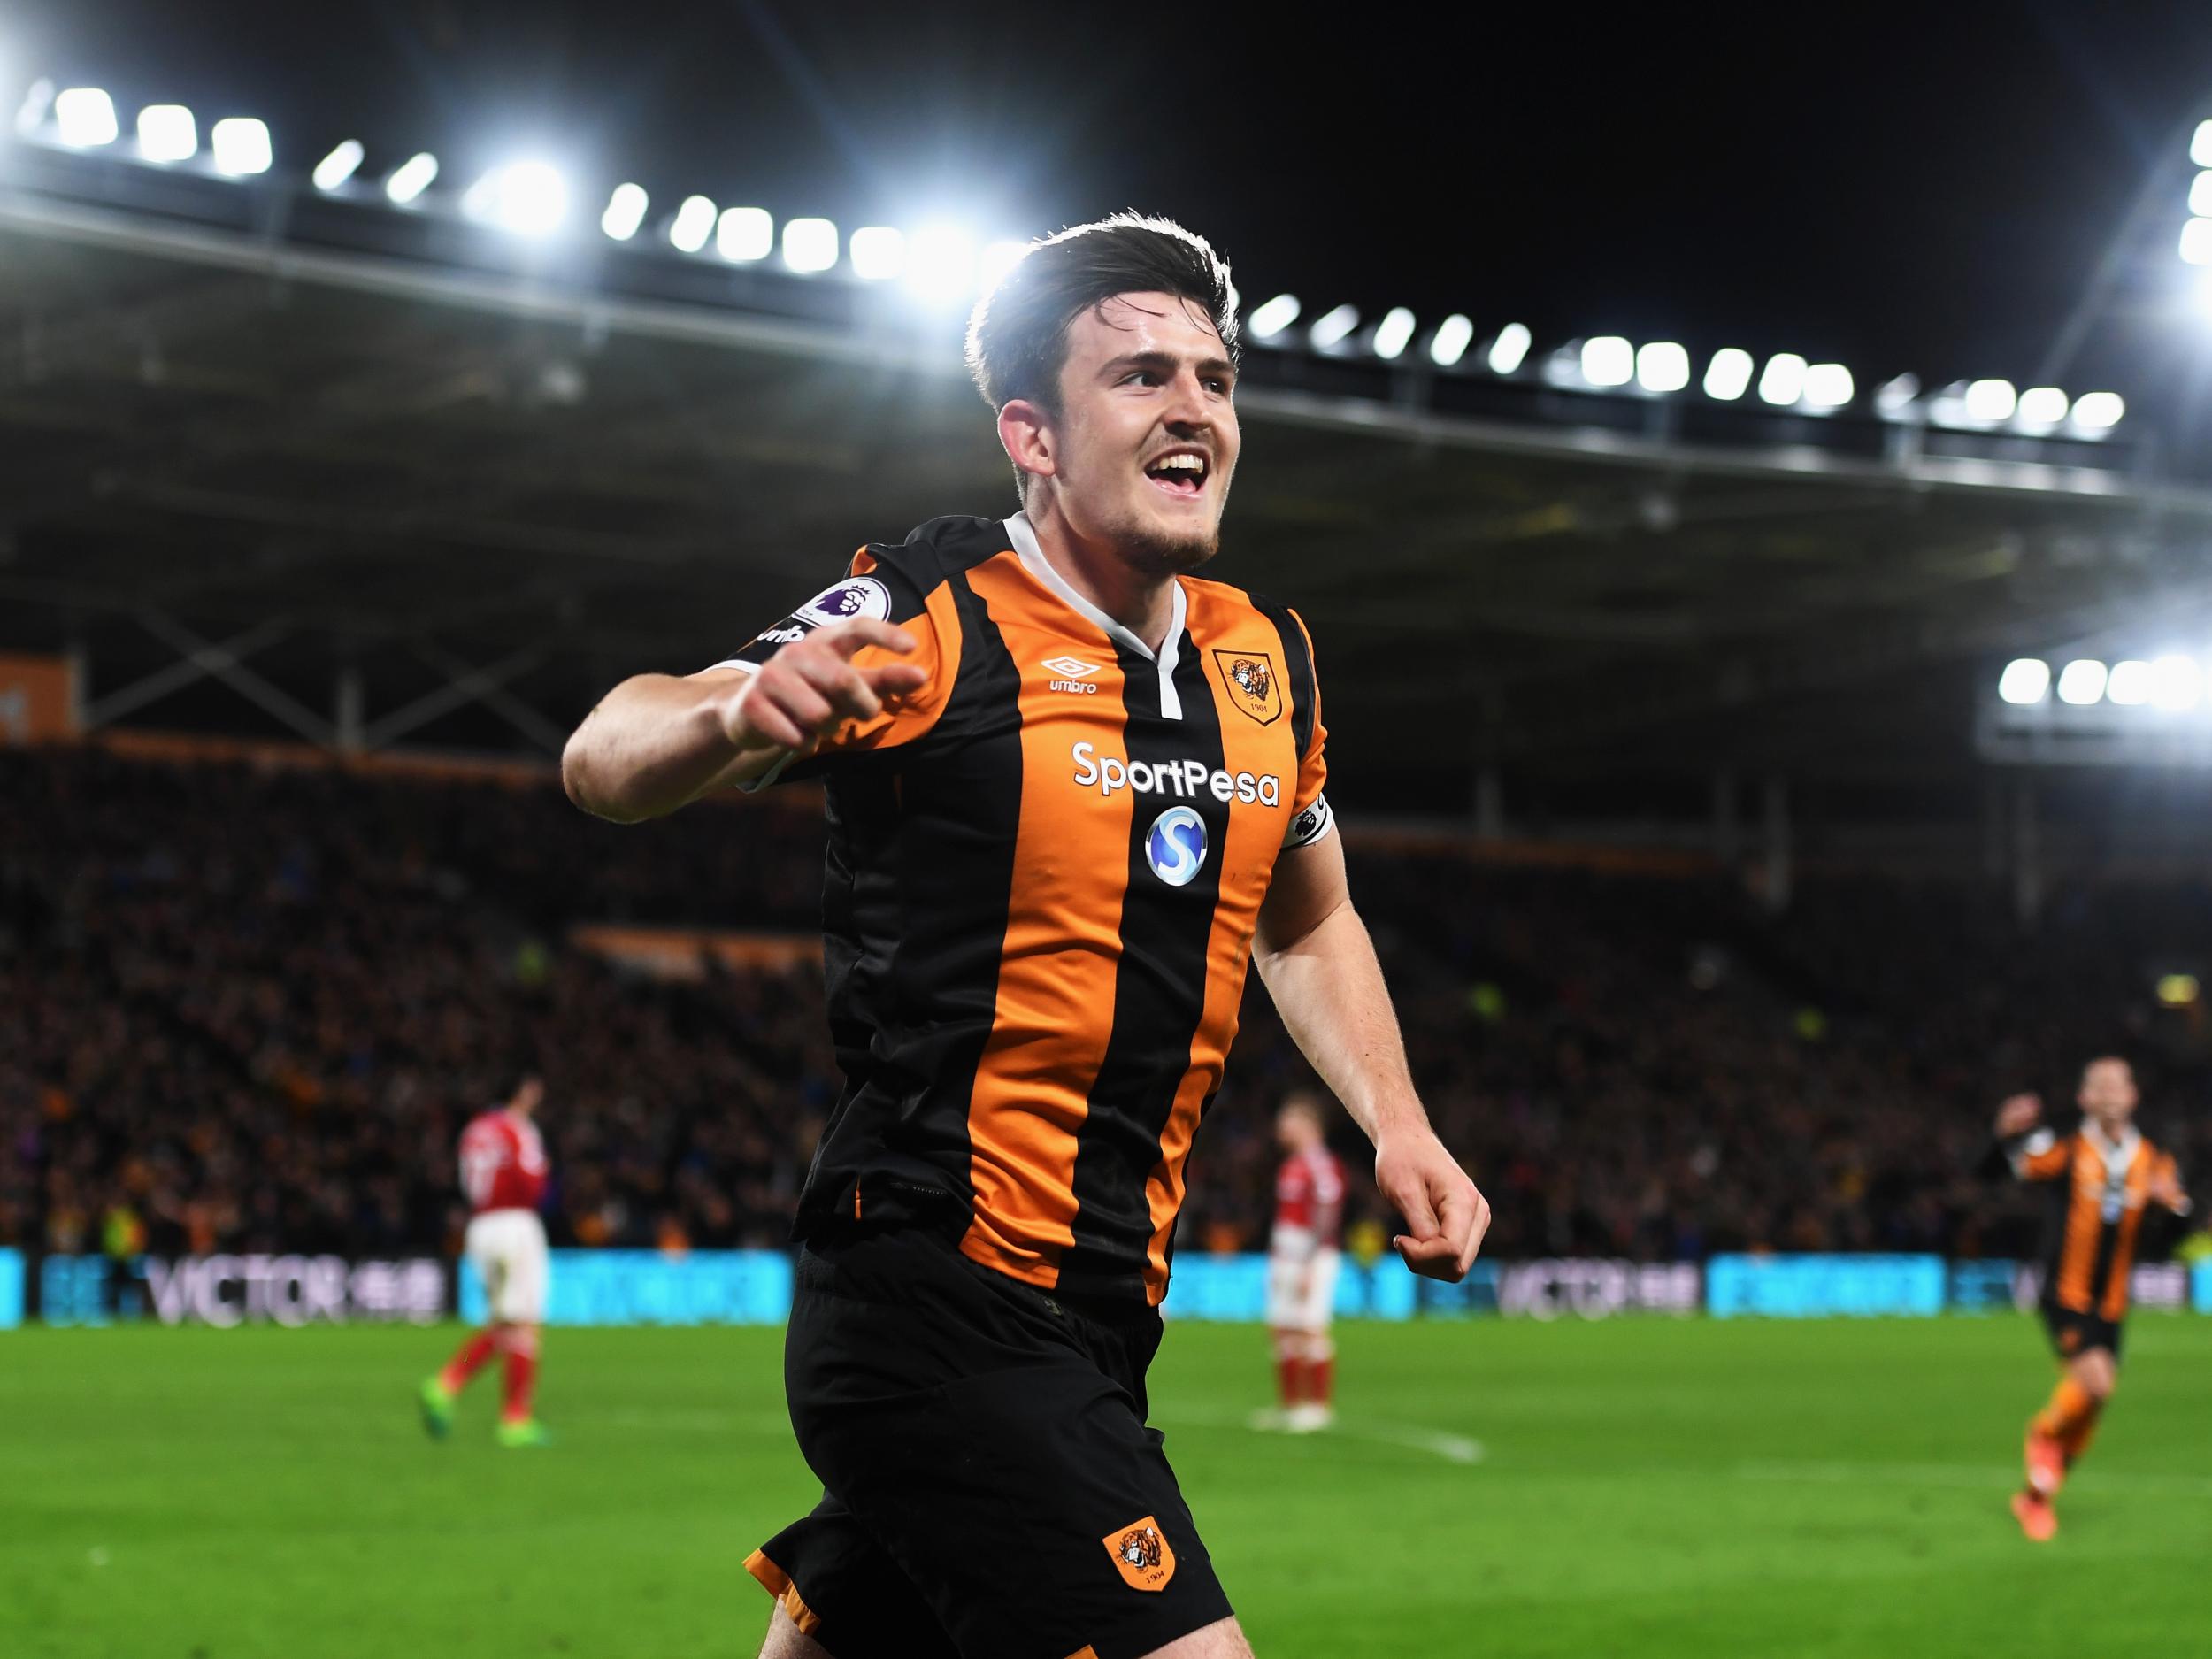 Harry Maguire finished the scoring to secure the points